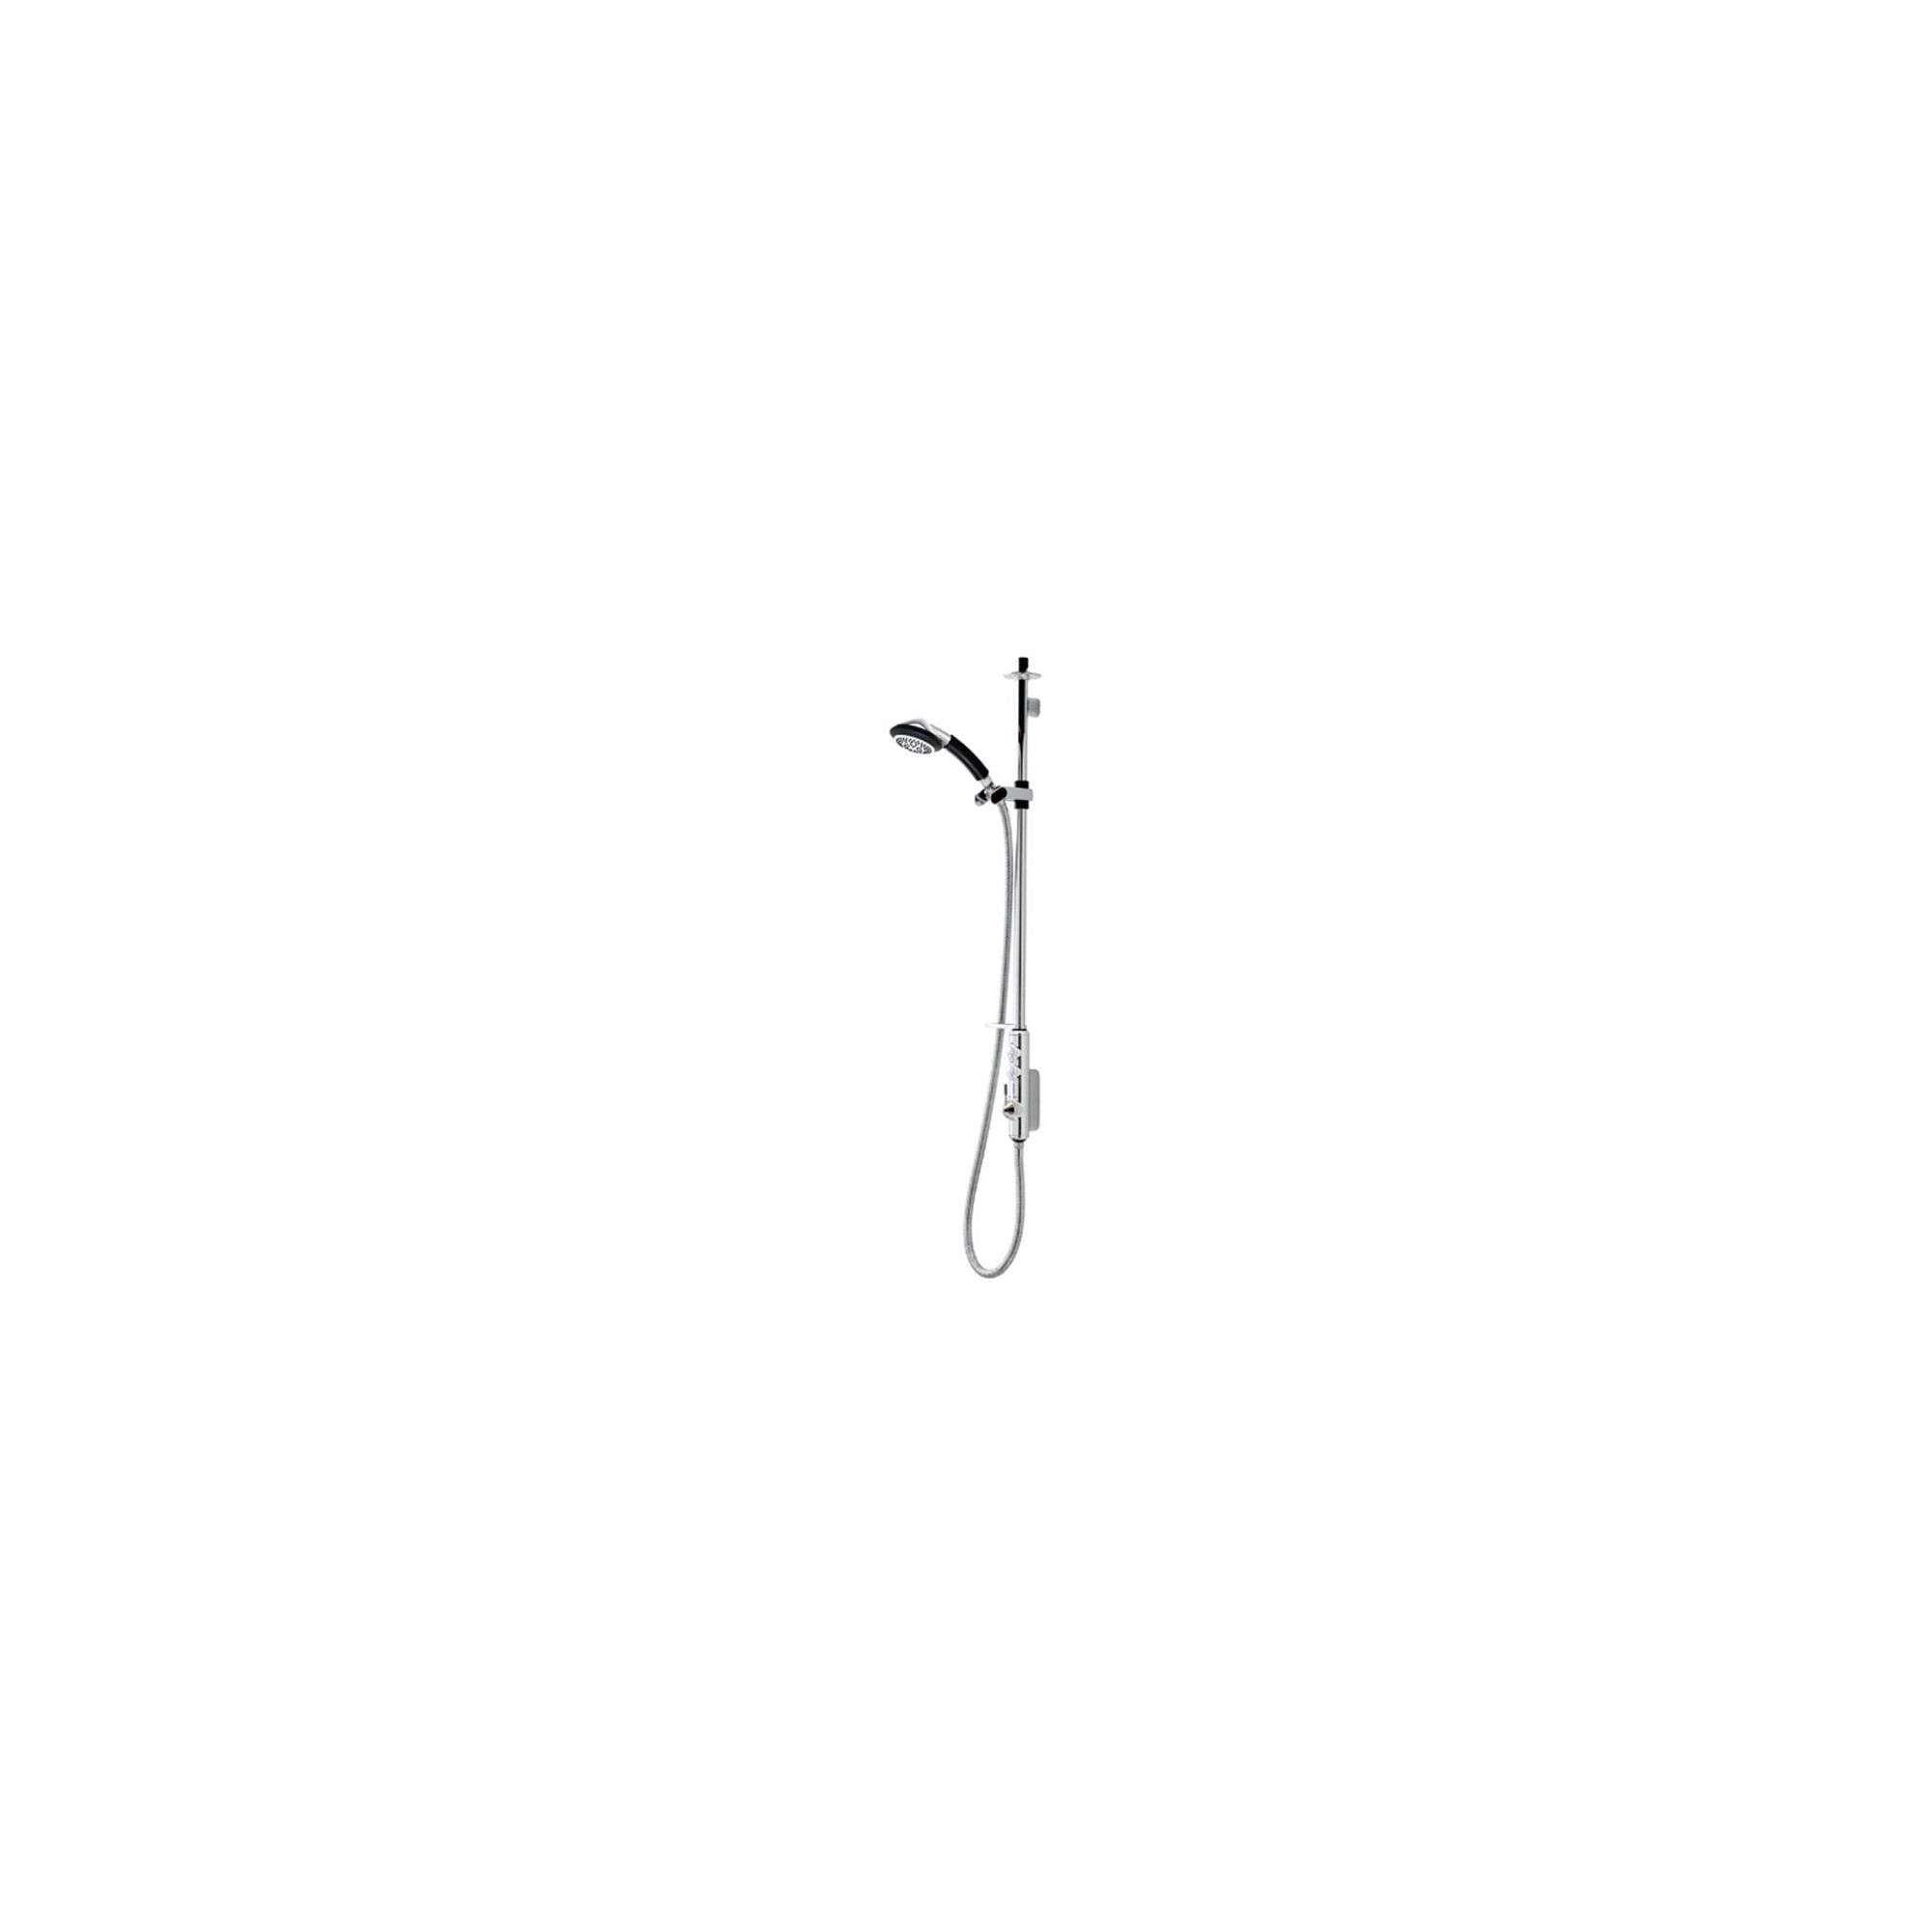 Aqualisa Axis Digital Concealed Shower with Adjustable Head Kit at Tesco Direct